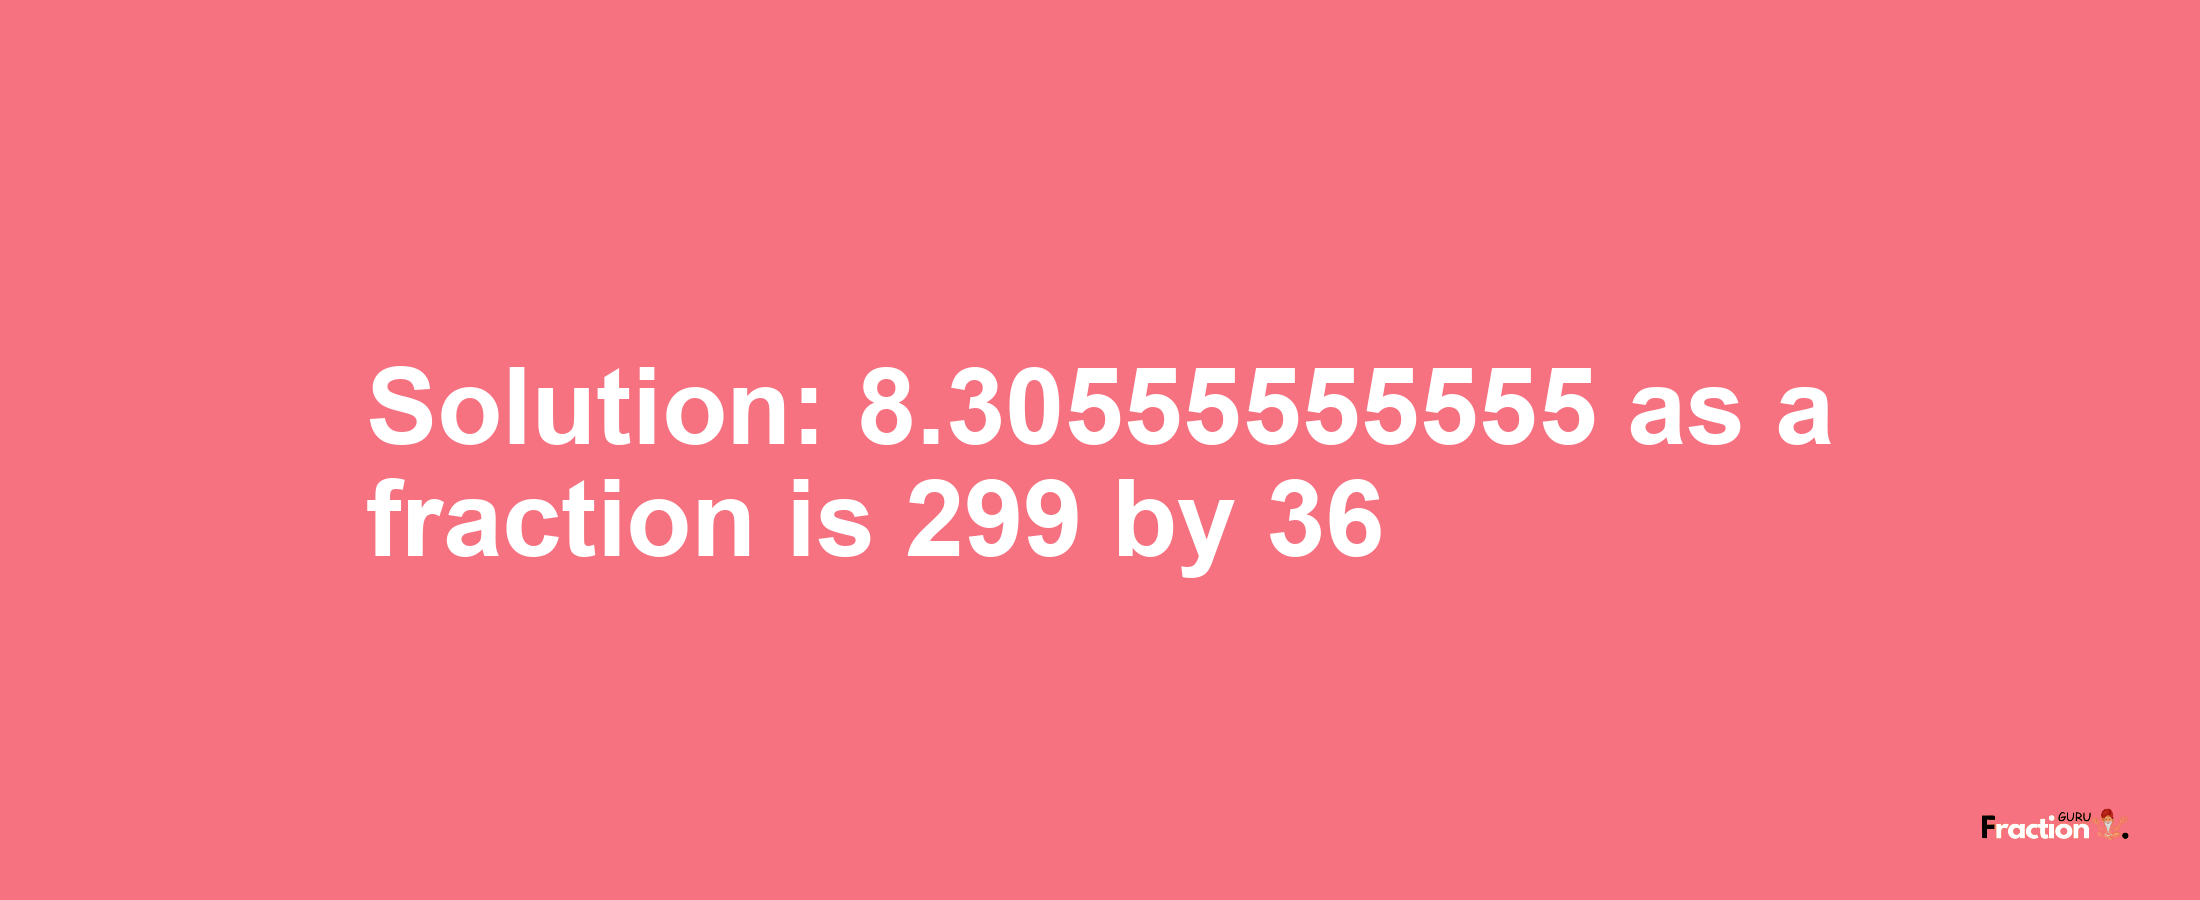 Solution:8.30555555555 as a fraction is 299/36